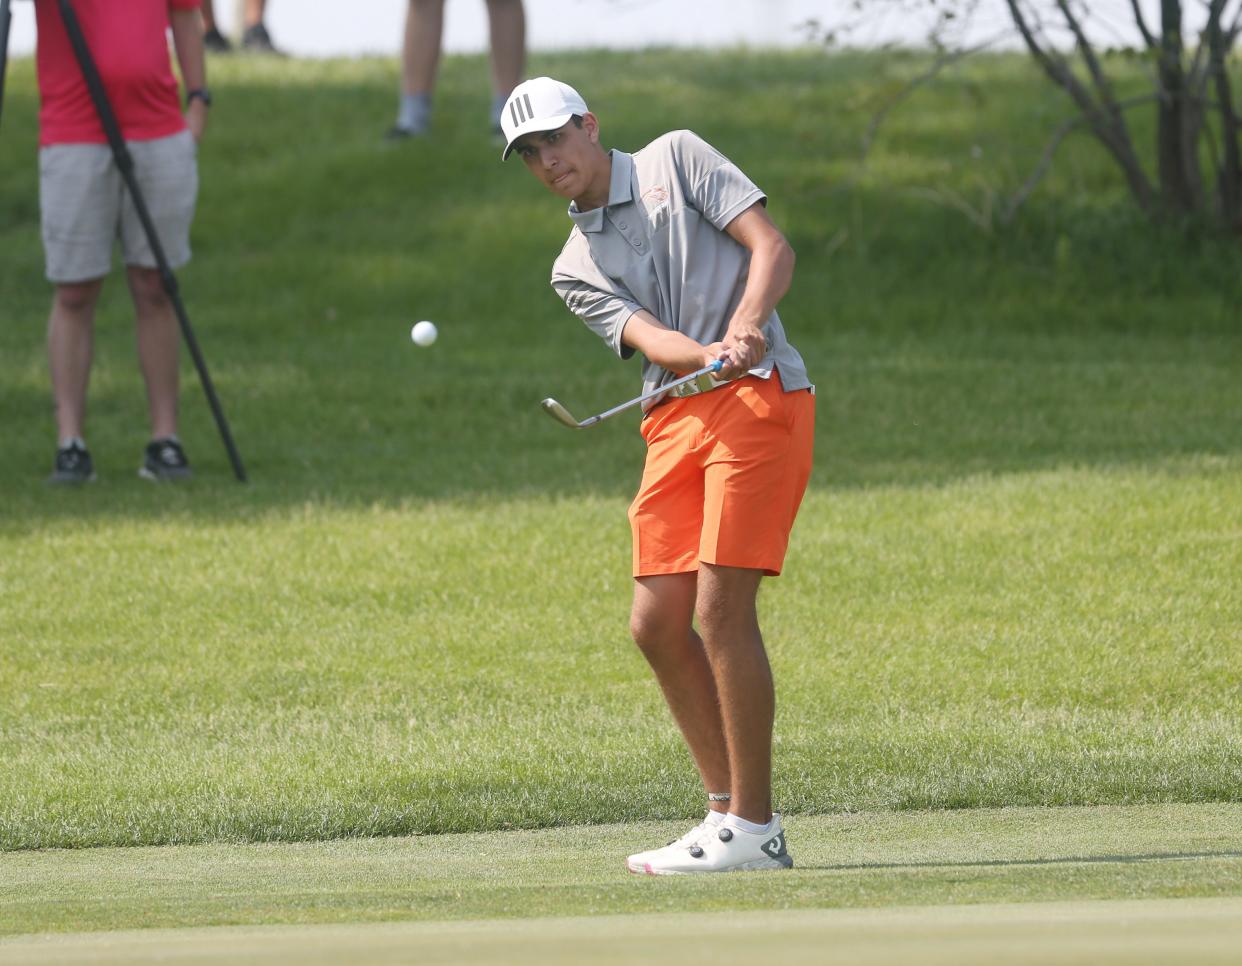 Washington's Roman Roth, seen here competing in last year's Class 3A boys state golf meet at the Veenker Memorial Golf Course in Ames, tied for the lowest 18-hole score in 3A so far in 2024 according to Varsity Bound with a 67 at the Mount Pleasant Invitational May 1 at the Mount Pleasant Golf and Country Club.